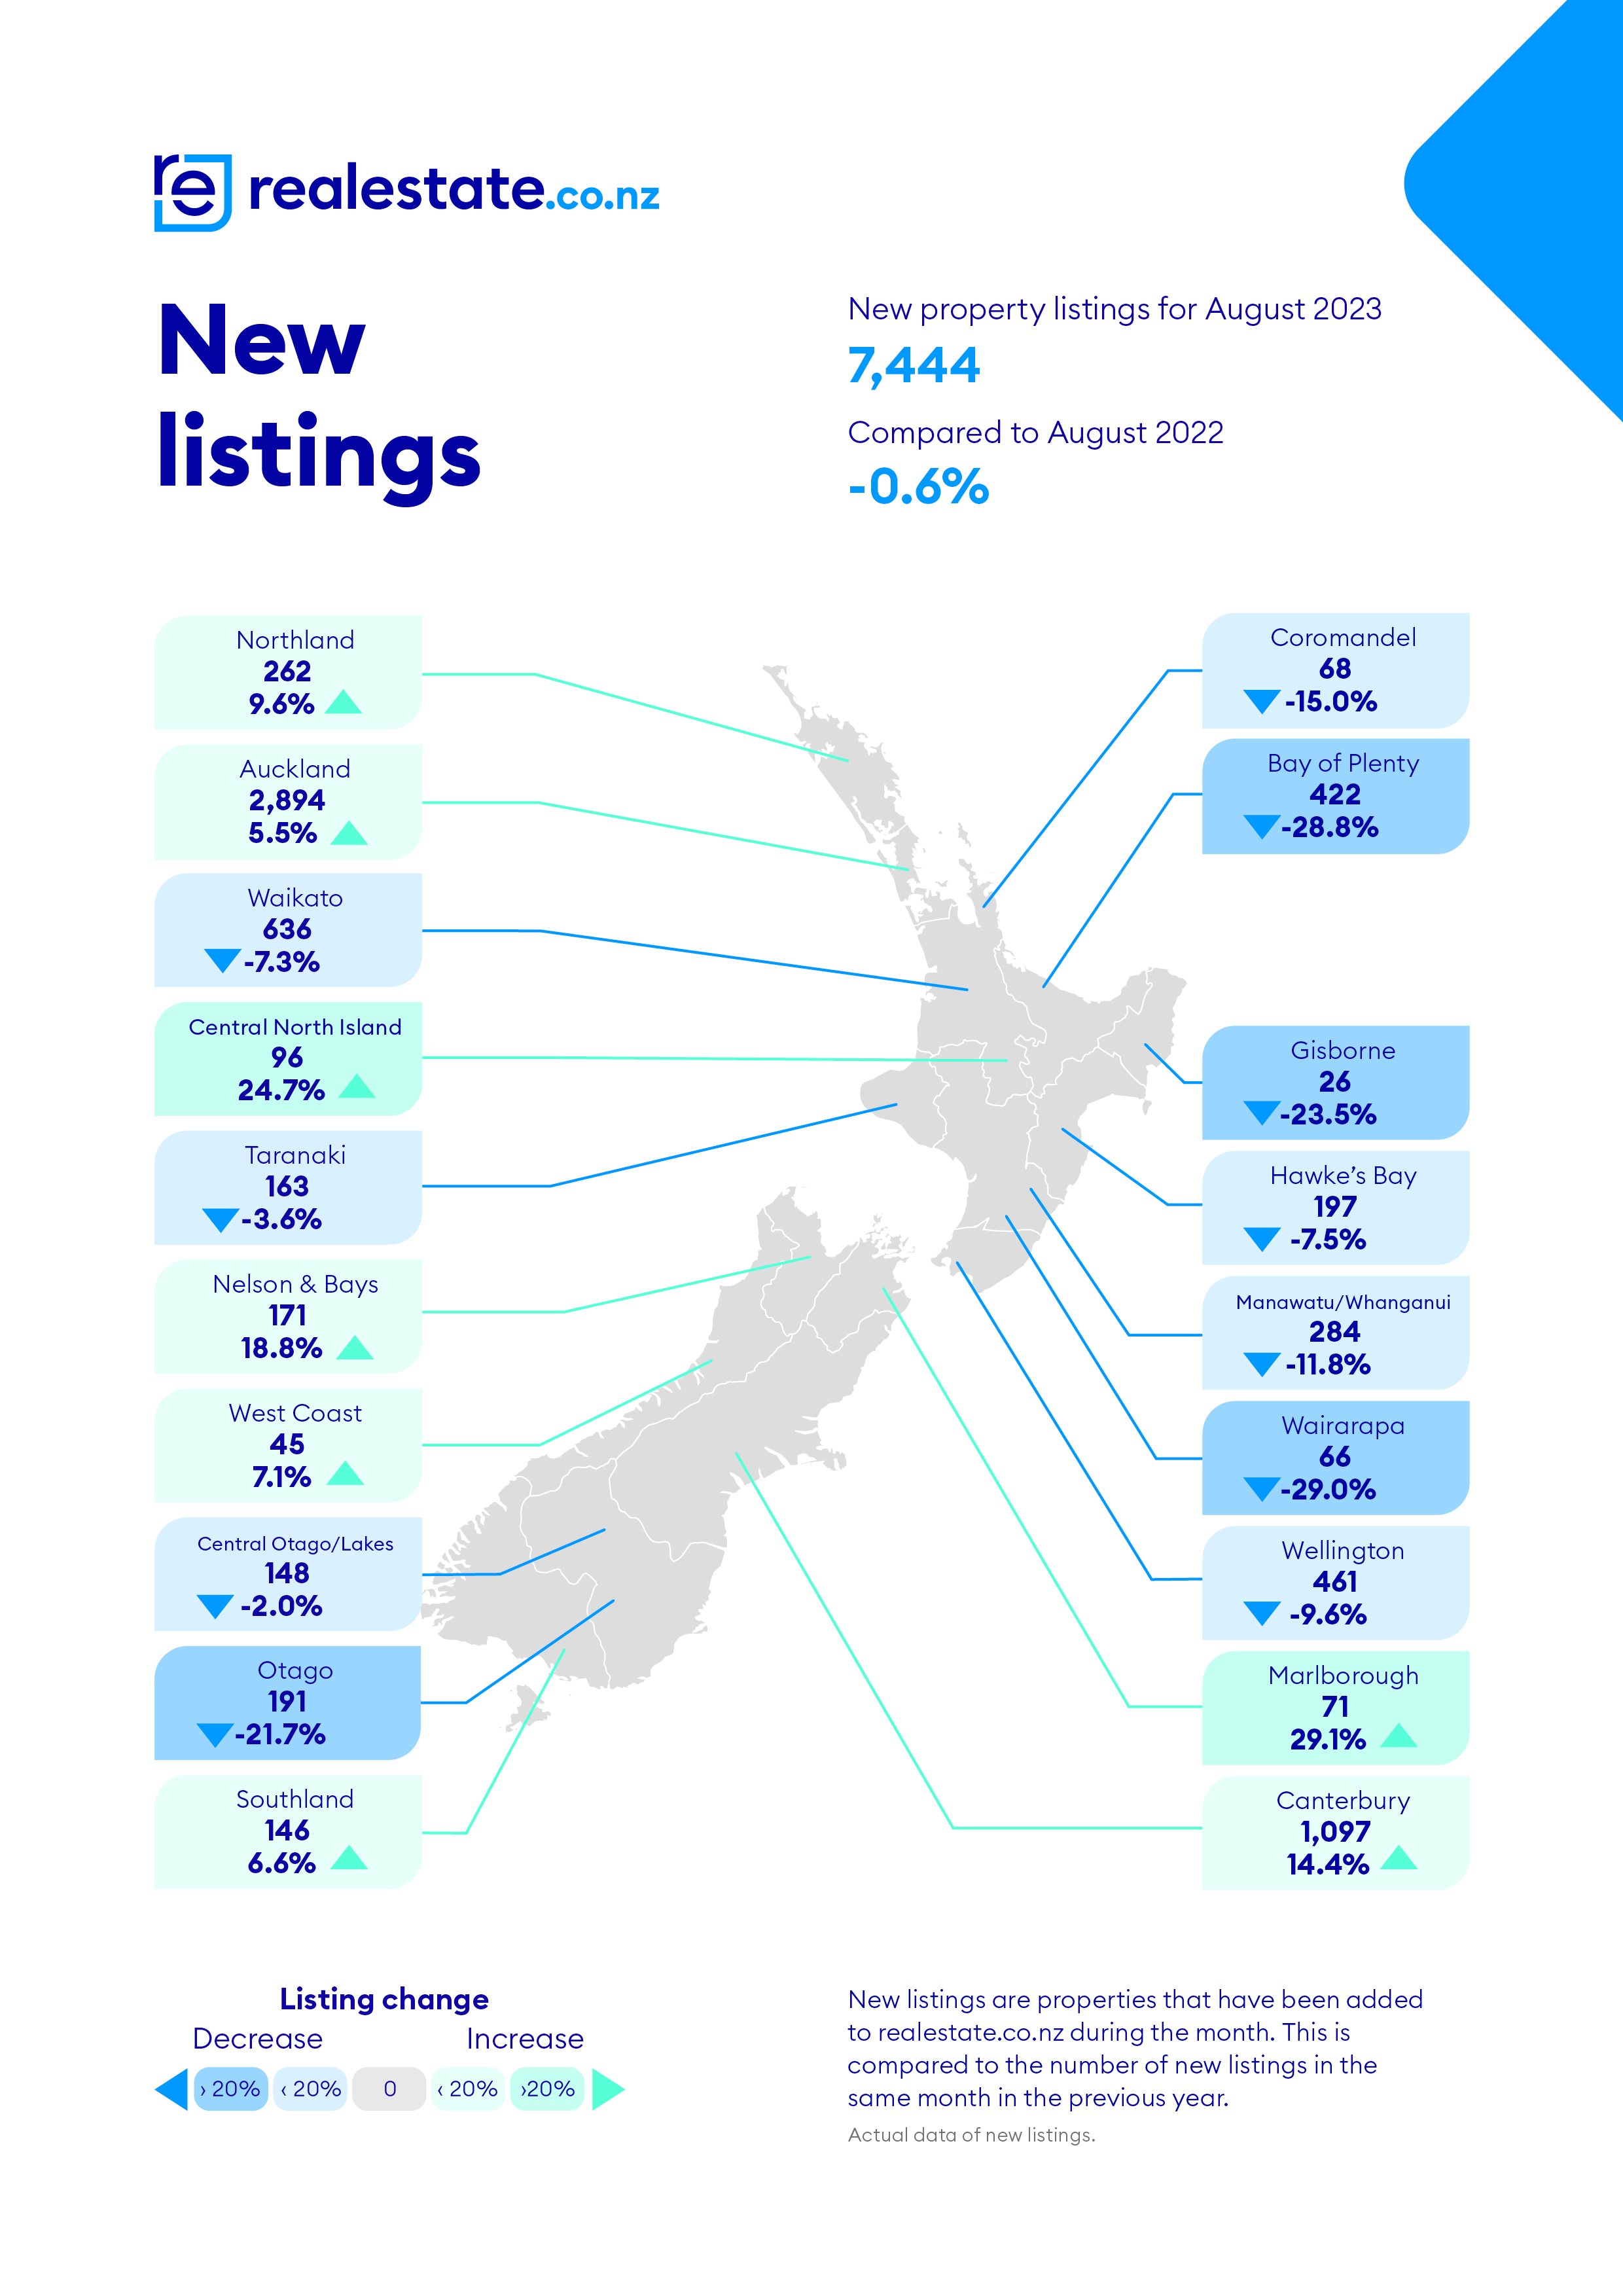 realestate.co.nz New listings August 2023 realestate.co.nz